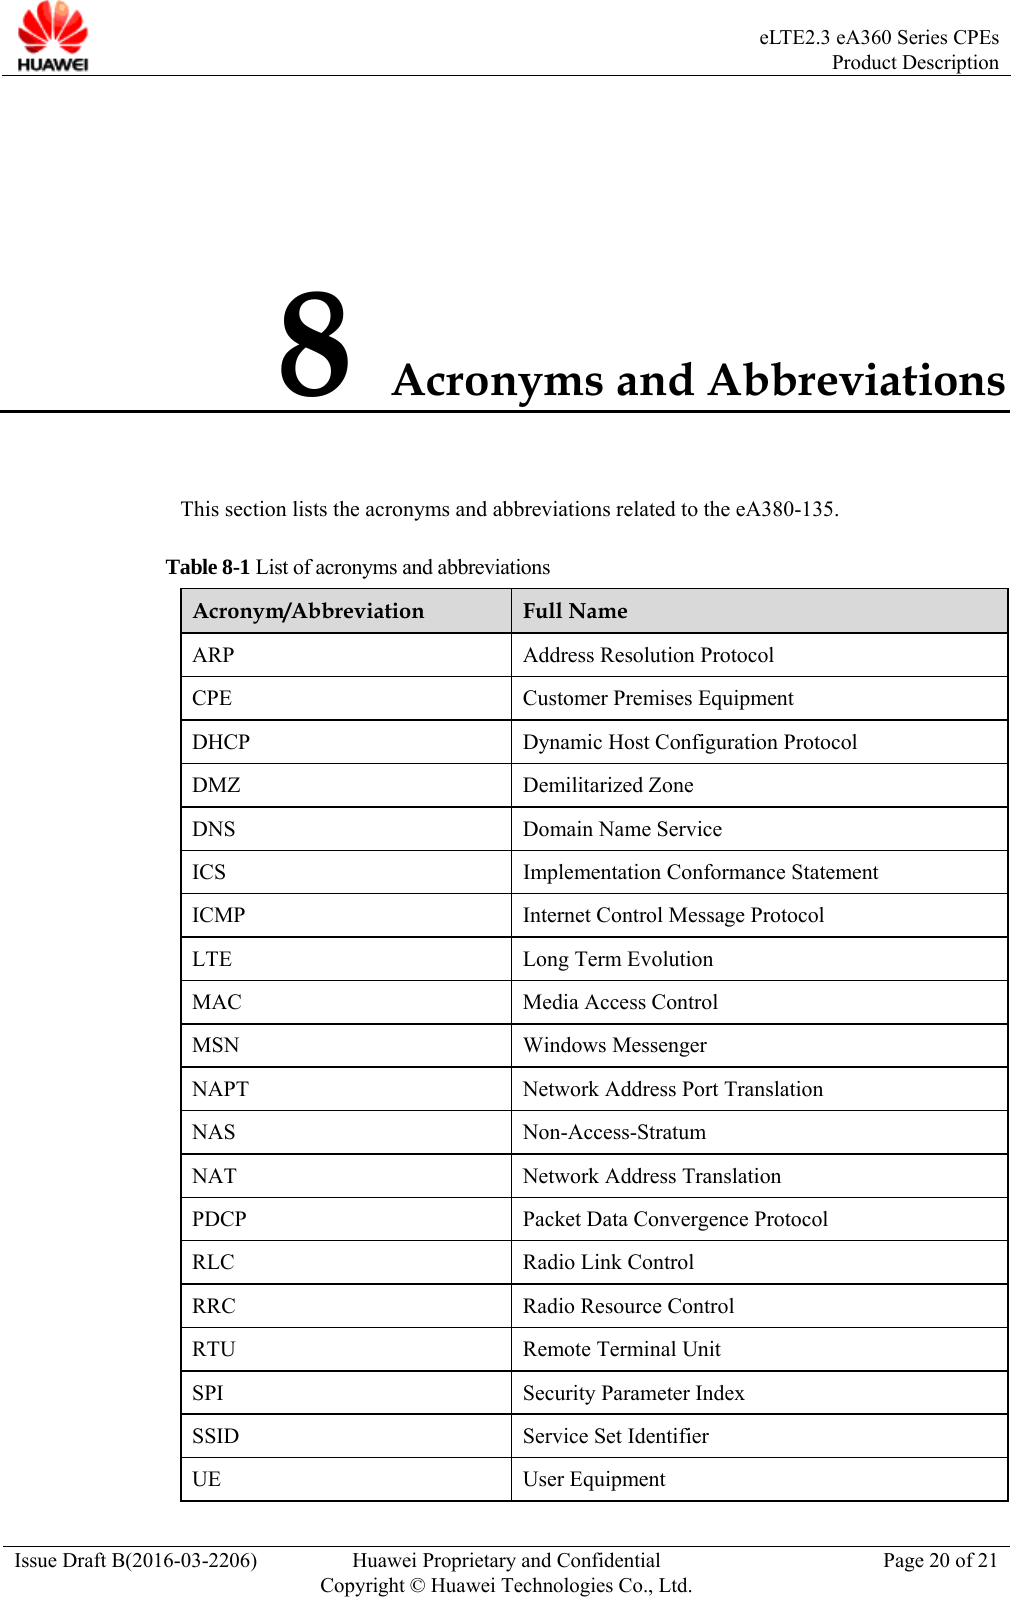  eLTE2.3 eA360 Series CPEsProduct Description Issue Draft B(2016-03-2206)  Huawei Proprietary and Confidential Copyright © Huawei Technologies Co., Ltd.Page 20 of 21 8 Acronyms and Abbreviations This section lists the acronyms and abbreviations related to the eA380-135. Table 8-1 List of acronyms and abbreviations Acronym/Abbreviation  Full Name ARP  Address Resolution Protocol CPE  Customer Premises Equipment DHCP  Dynamic Host Configuration Protocol DMZ Demilitarized Zone DNS  Domain Name Service ICS  Implementation Conformance Statement ICMP Internet Control Message Protocol LTE  Long Term Evolution MAC  Media Access Control MSN Windows Messenger NAPT  Network Address Port Translation NAS Non-Access-Stratum NAT  Network Address Translation PDCP  Packet Data Convergence Protocol RLC  Radio Link Control RRC Radio Resource Control RTU  Remote Terminal Unit SPI  Security Parameter Index SSID  Service Set Identifier UE User Equipment 